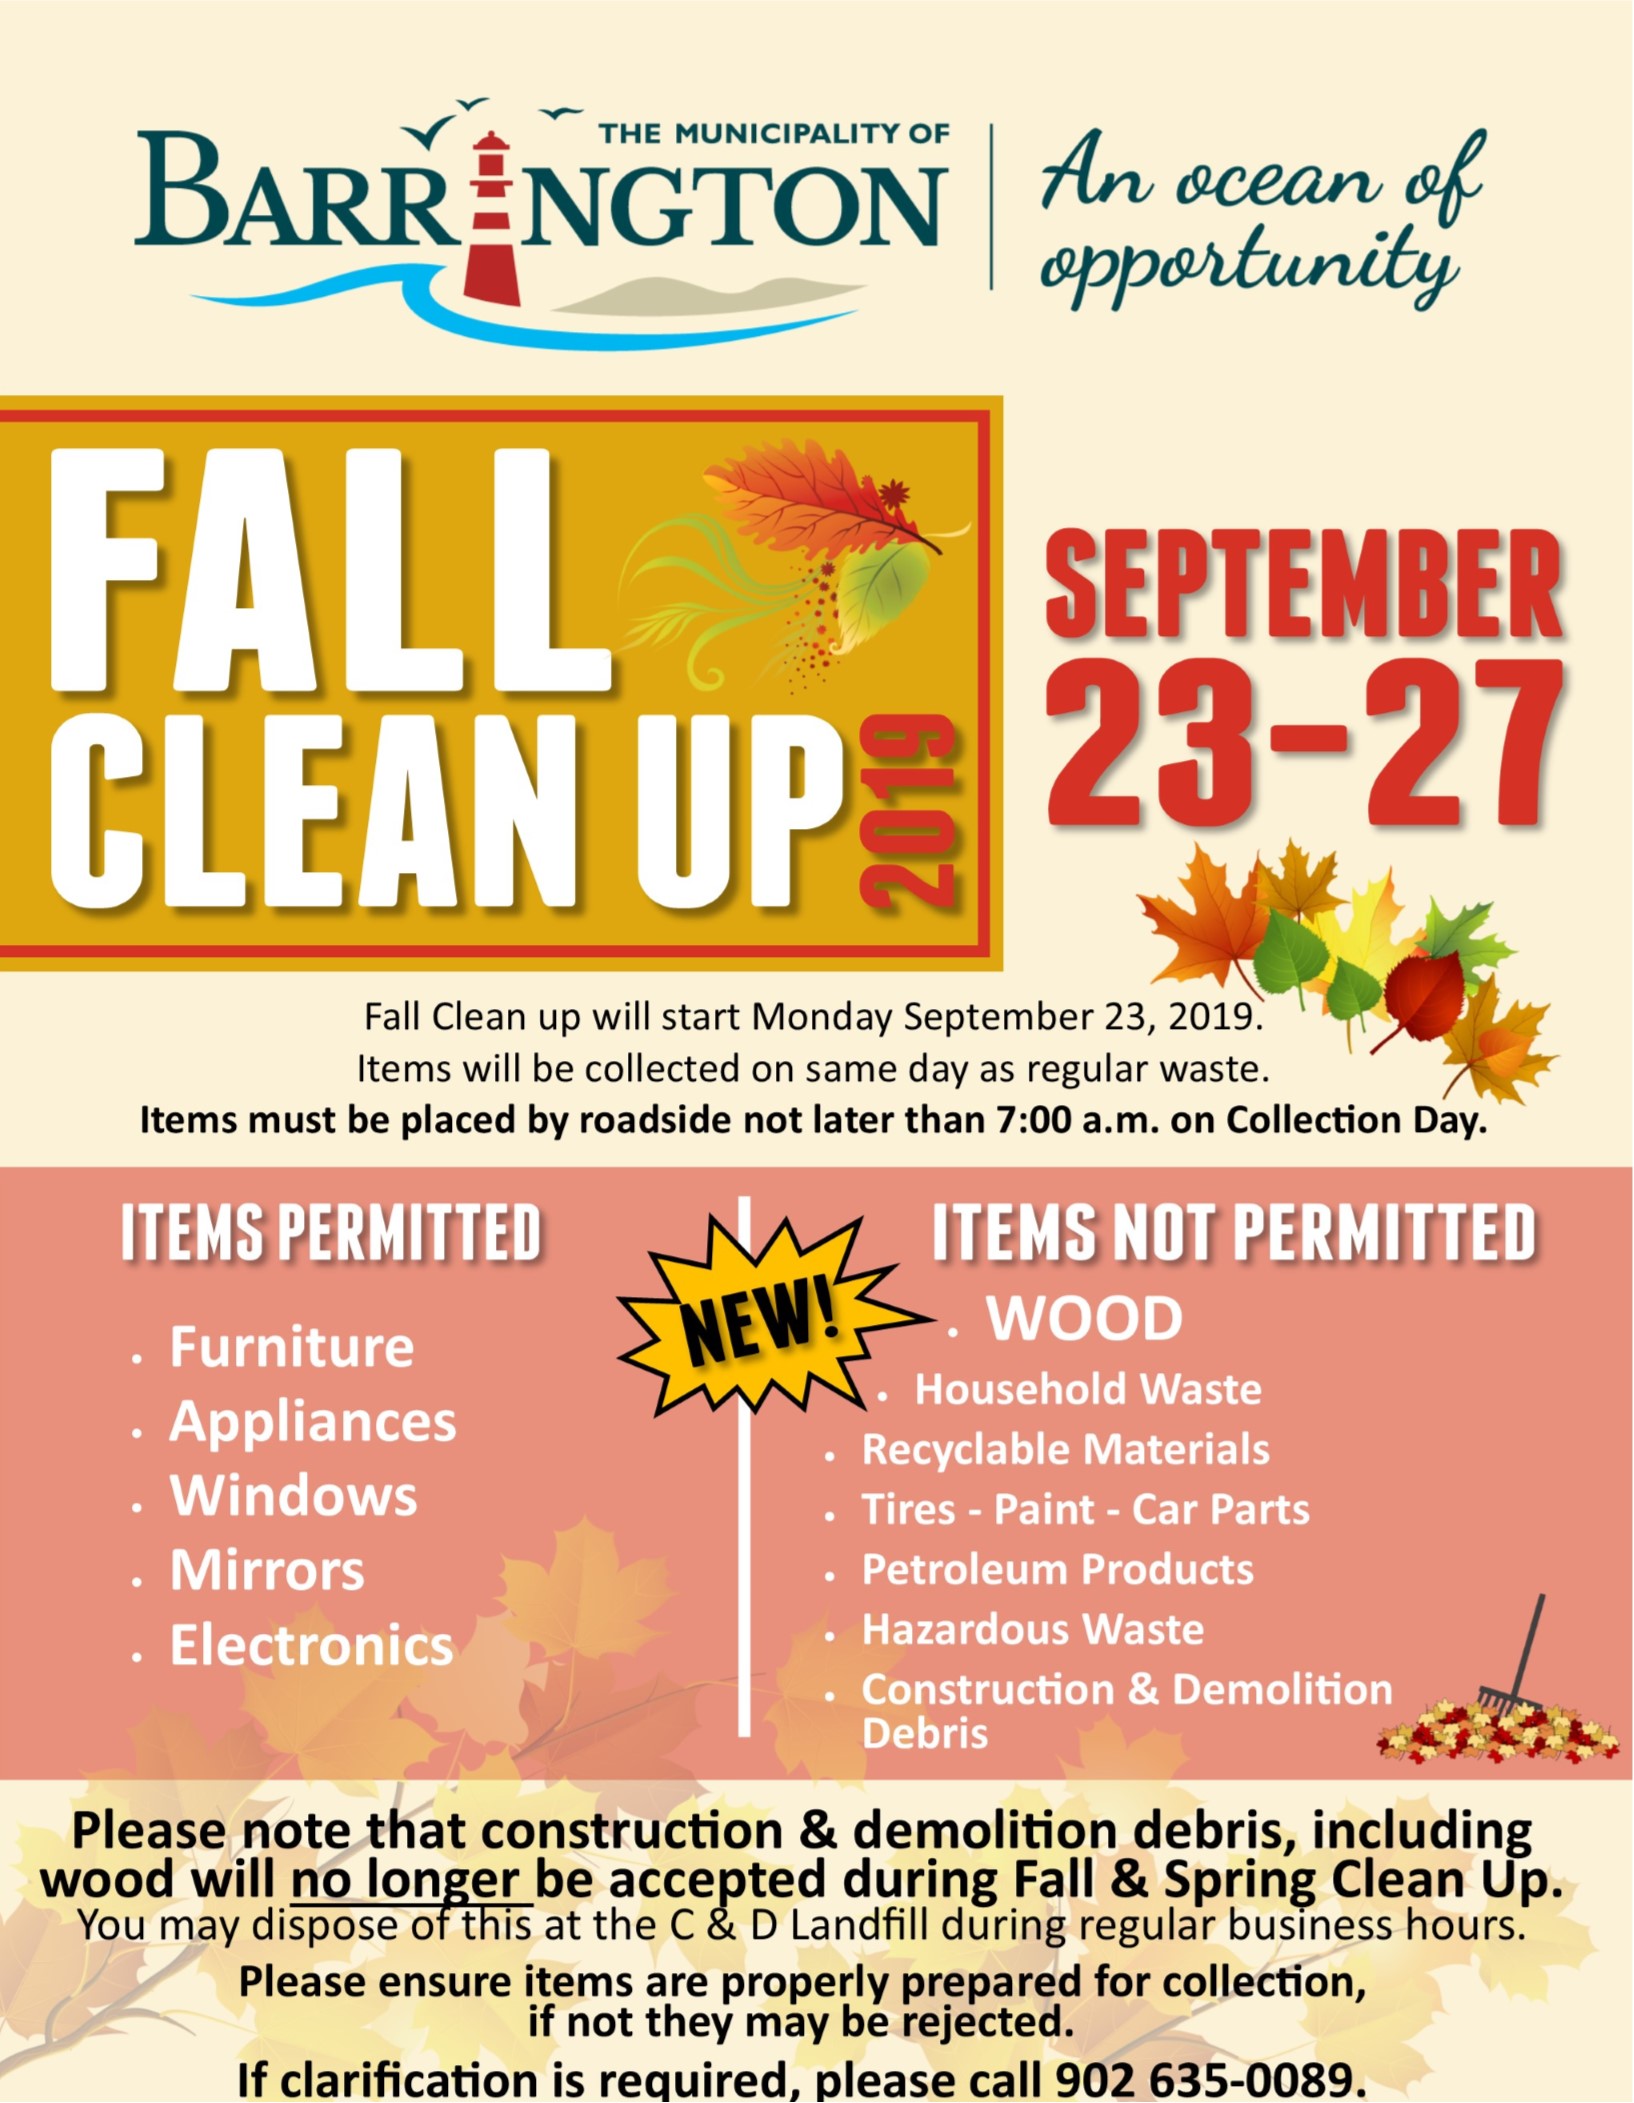 Fall Clean Up 2019